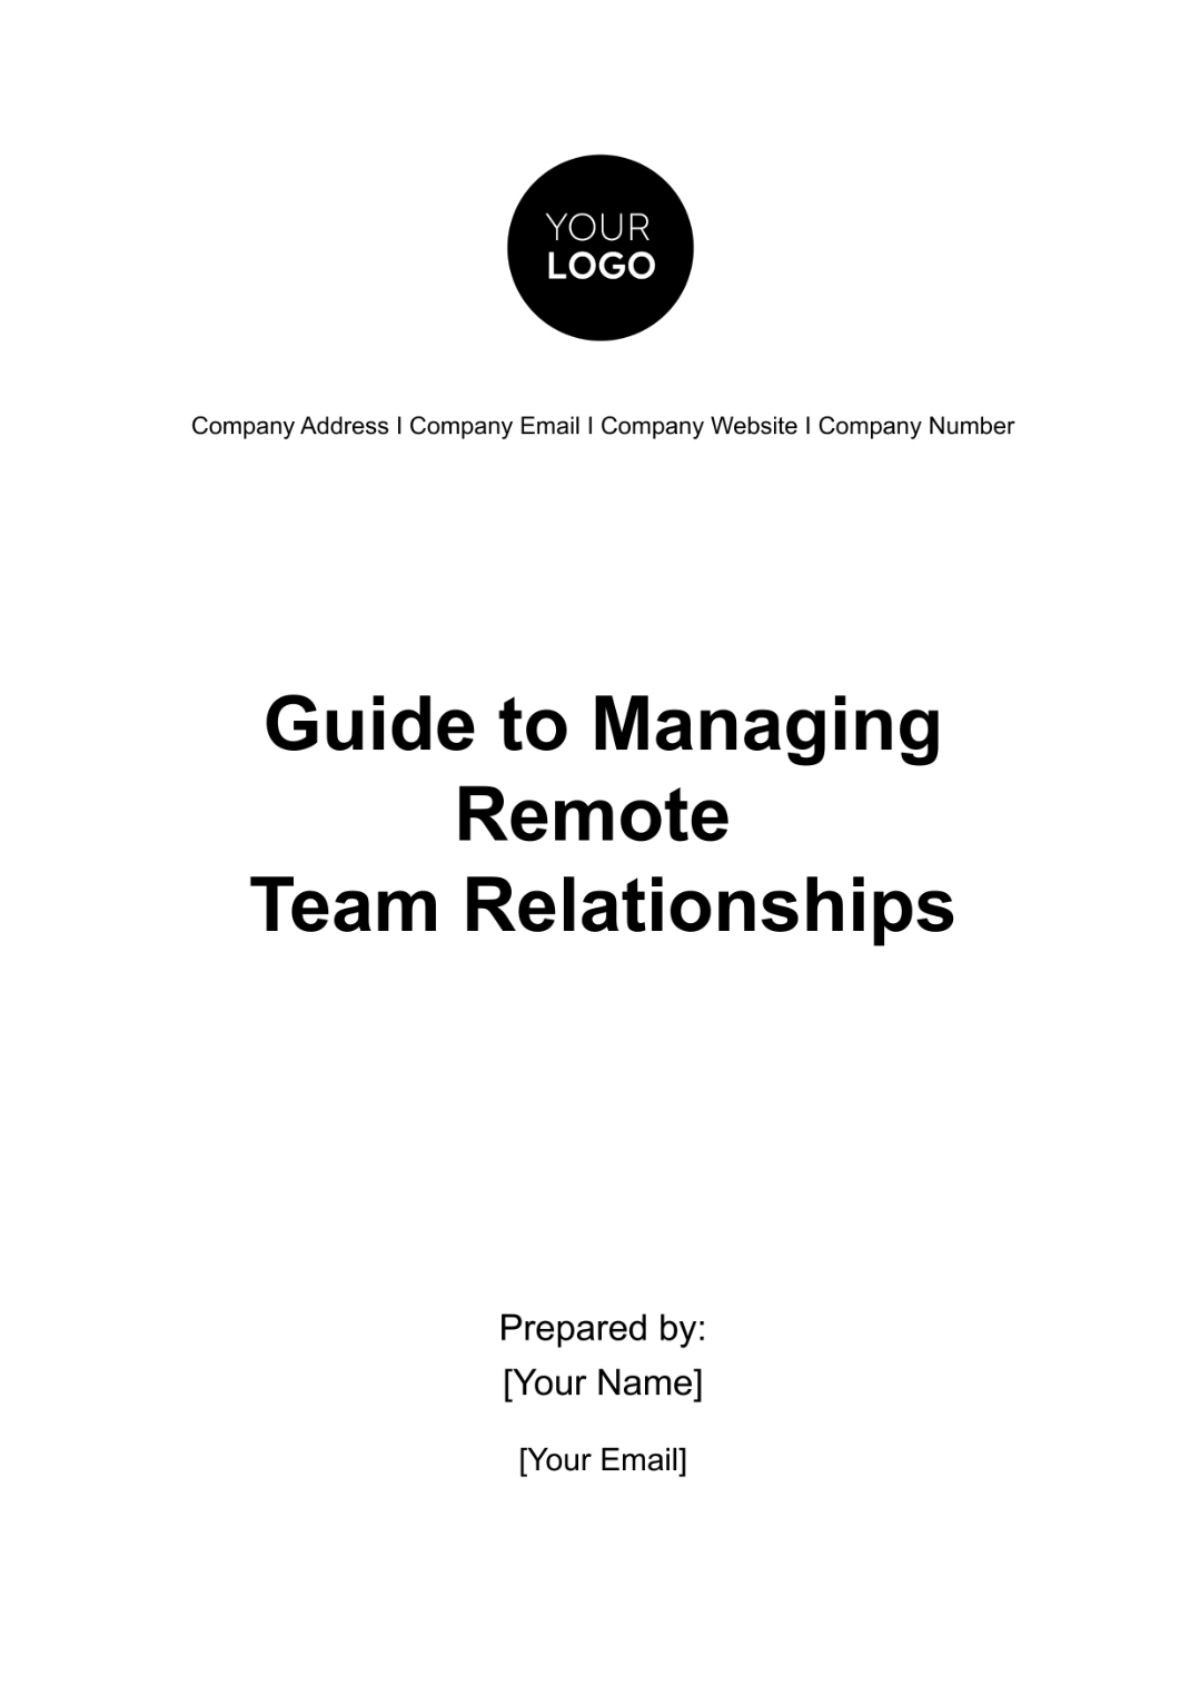 Free Guide to Managing Remote Team Relationships HR Template